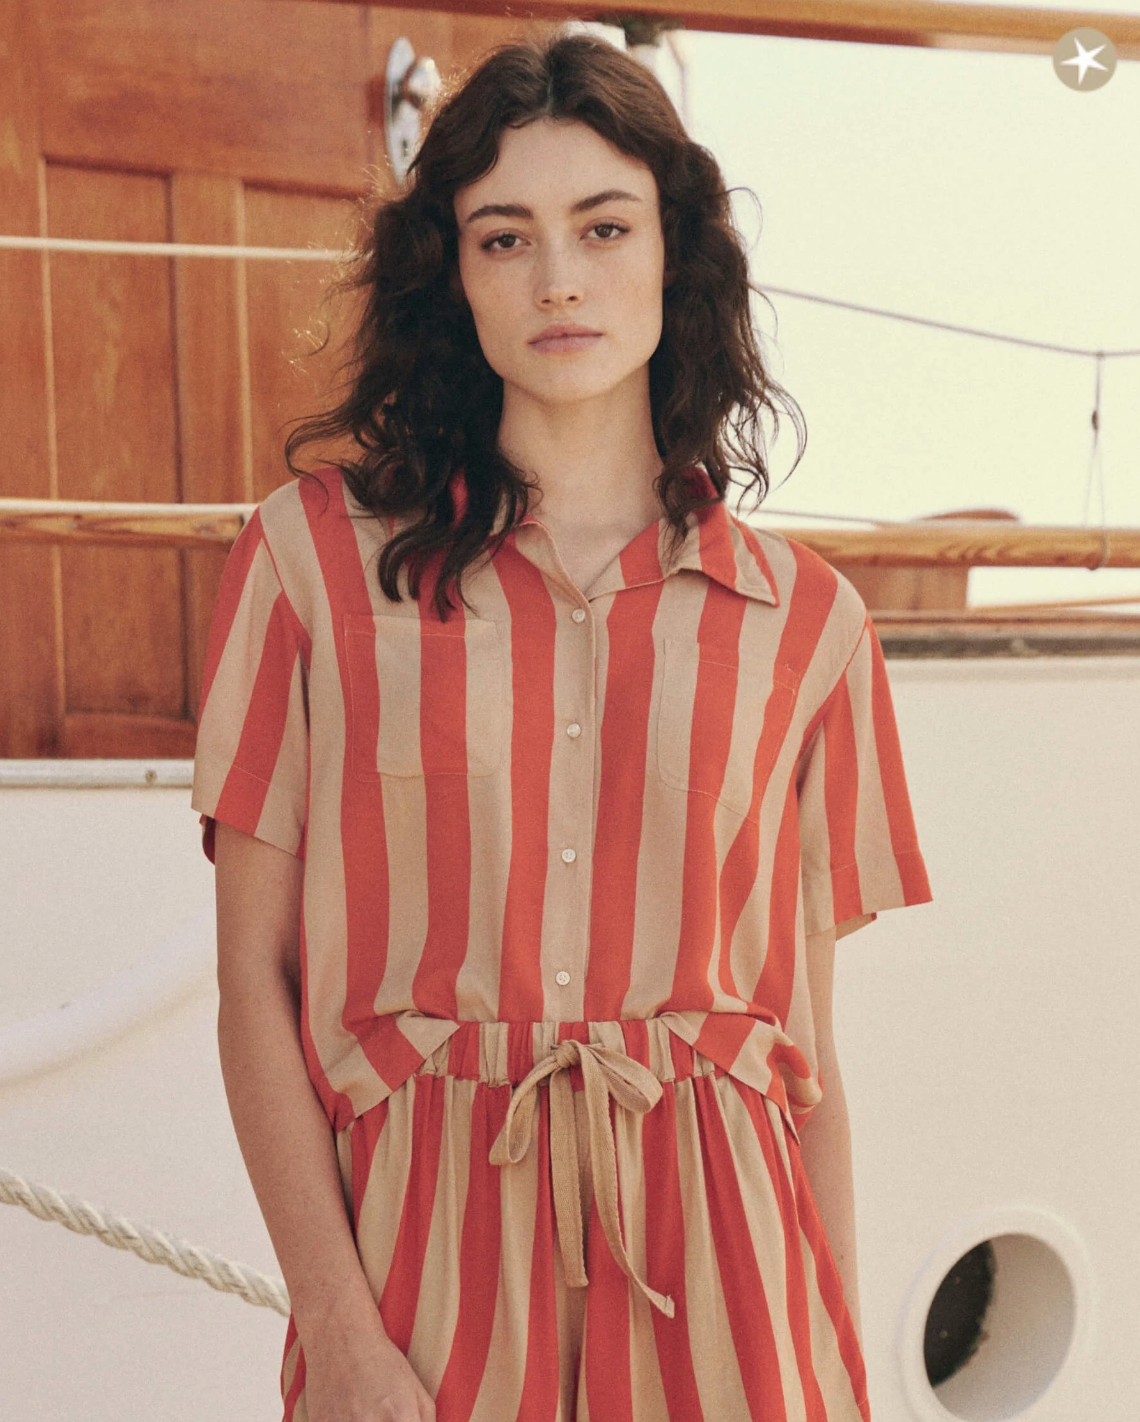 A person with long, wavy hair is wearing The Bowling Shirt by The Great Inc., a vintage men's shirt with a short-sleeve, button-down style and matching pants featuring wide red and beige vertical stripes. They are standing in front of a wooden structure and rope on a boat.